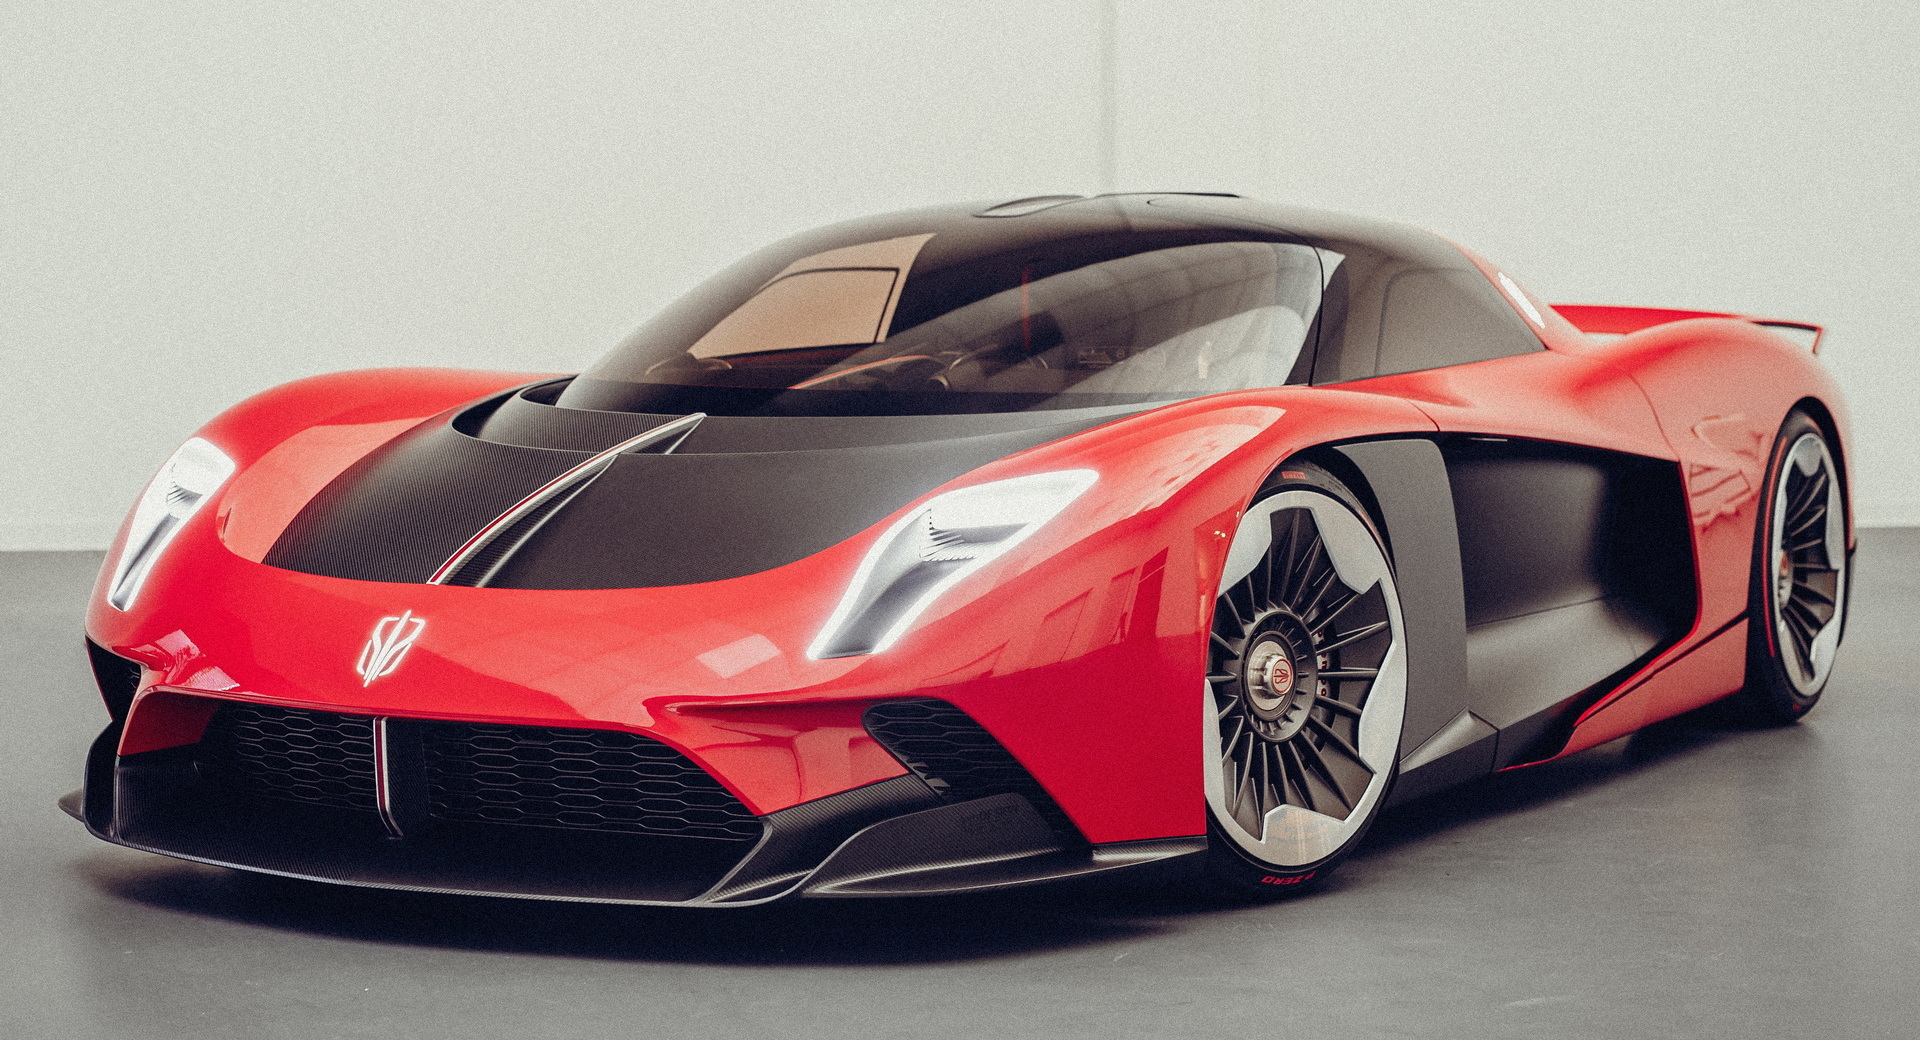 Silk-FAW's plan to build S9 hypercar in Italy hits the skids